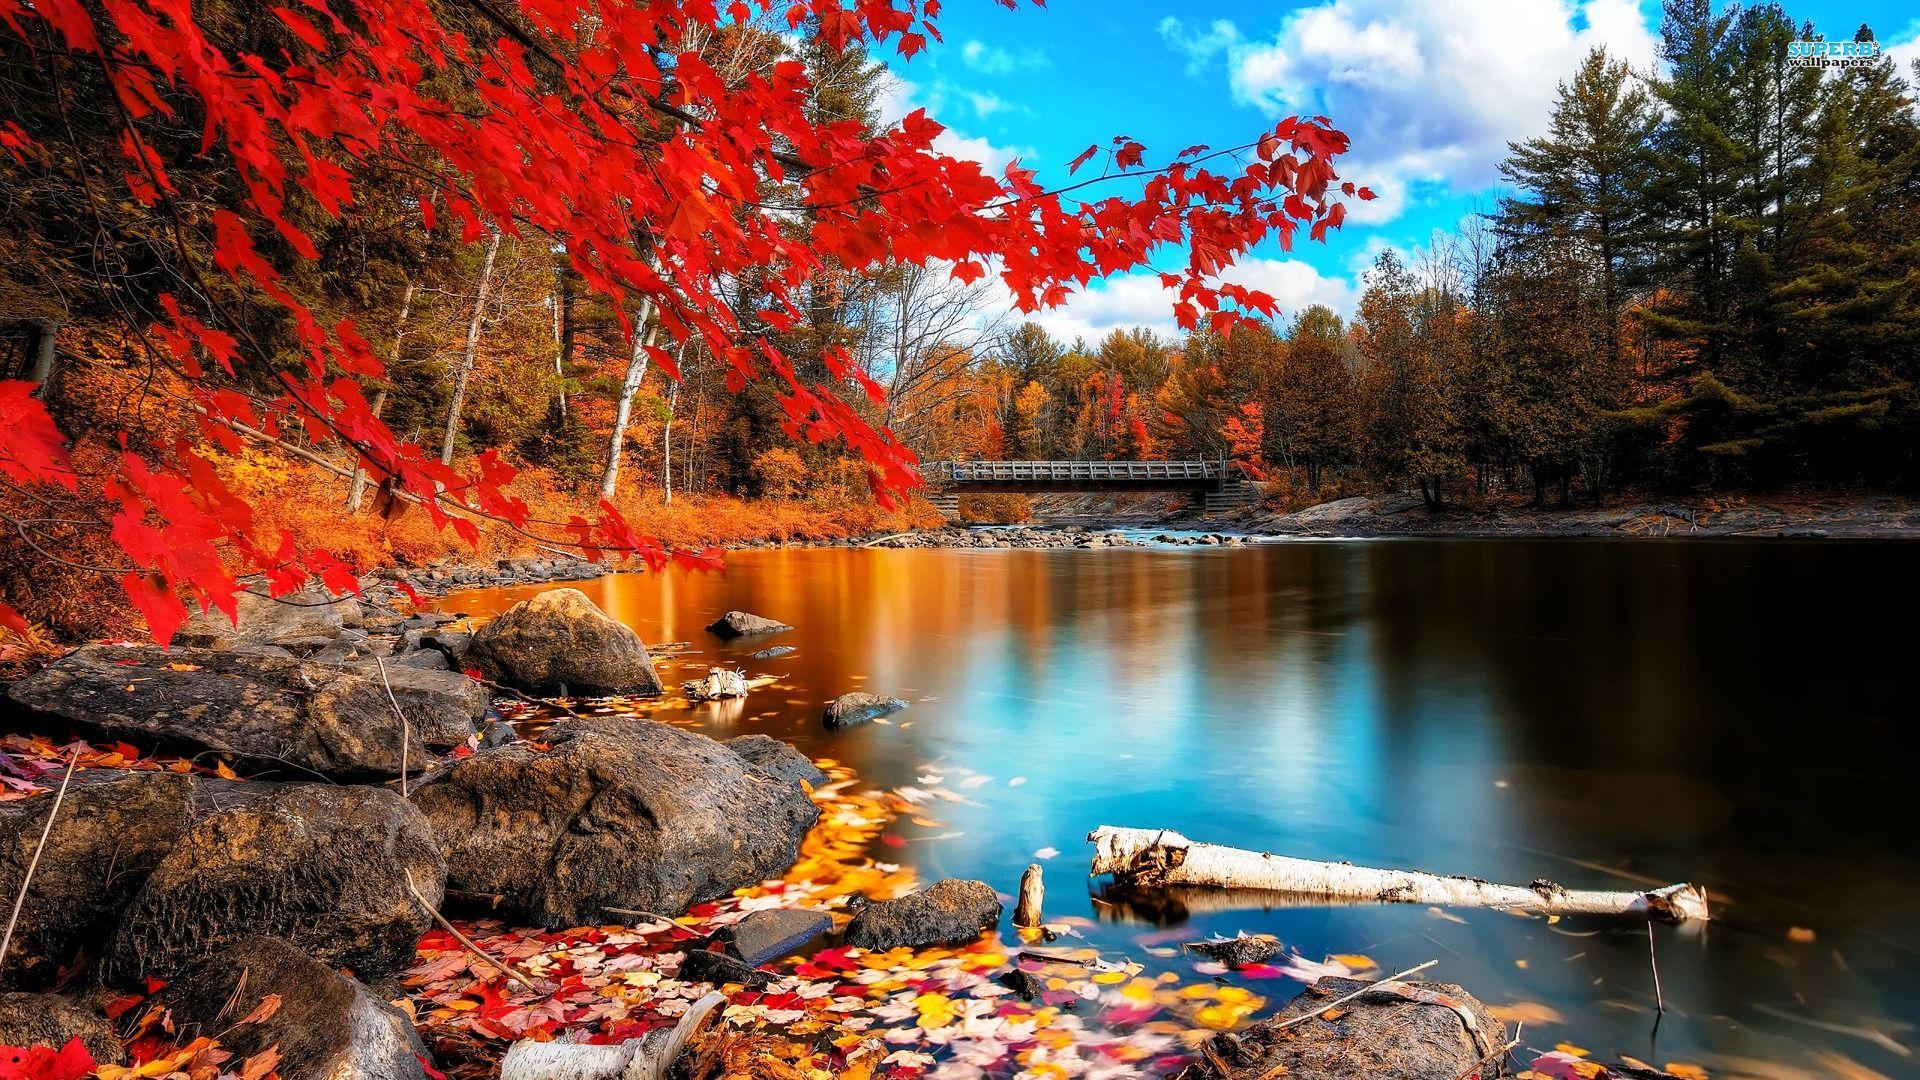 Autumn Beauty HD Wallpaper. Awesome photo. Autumn lake, Forest